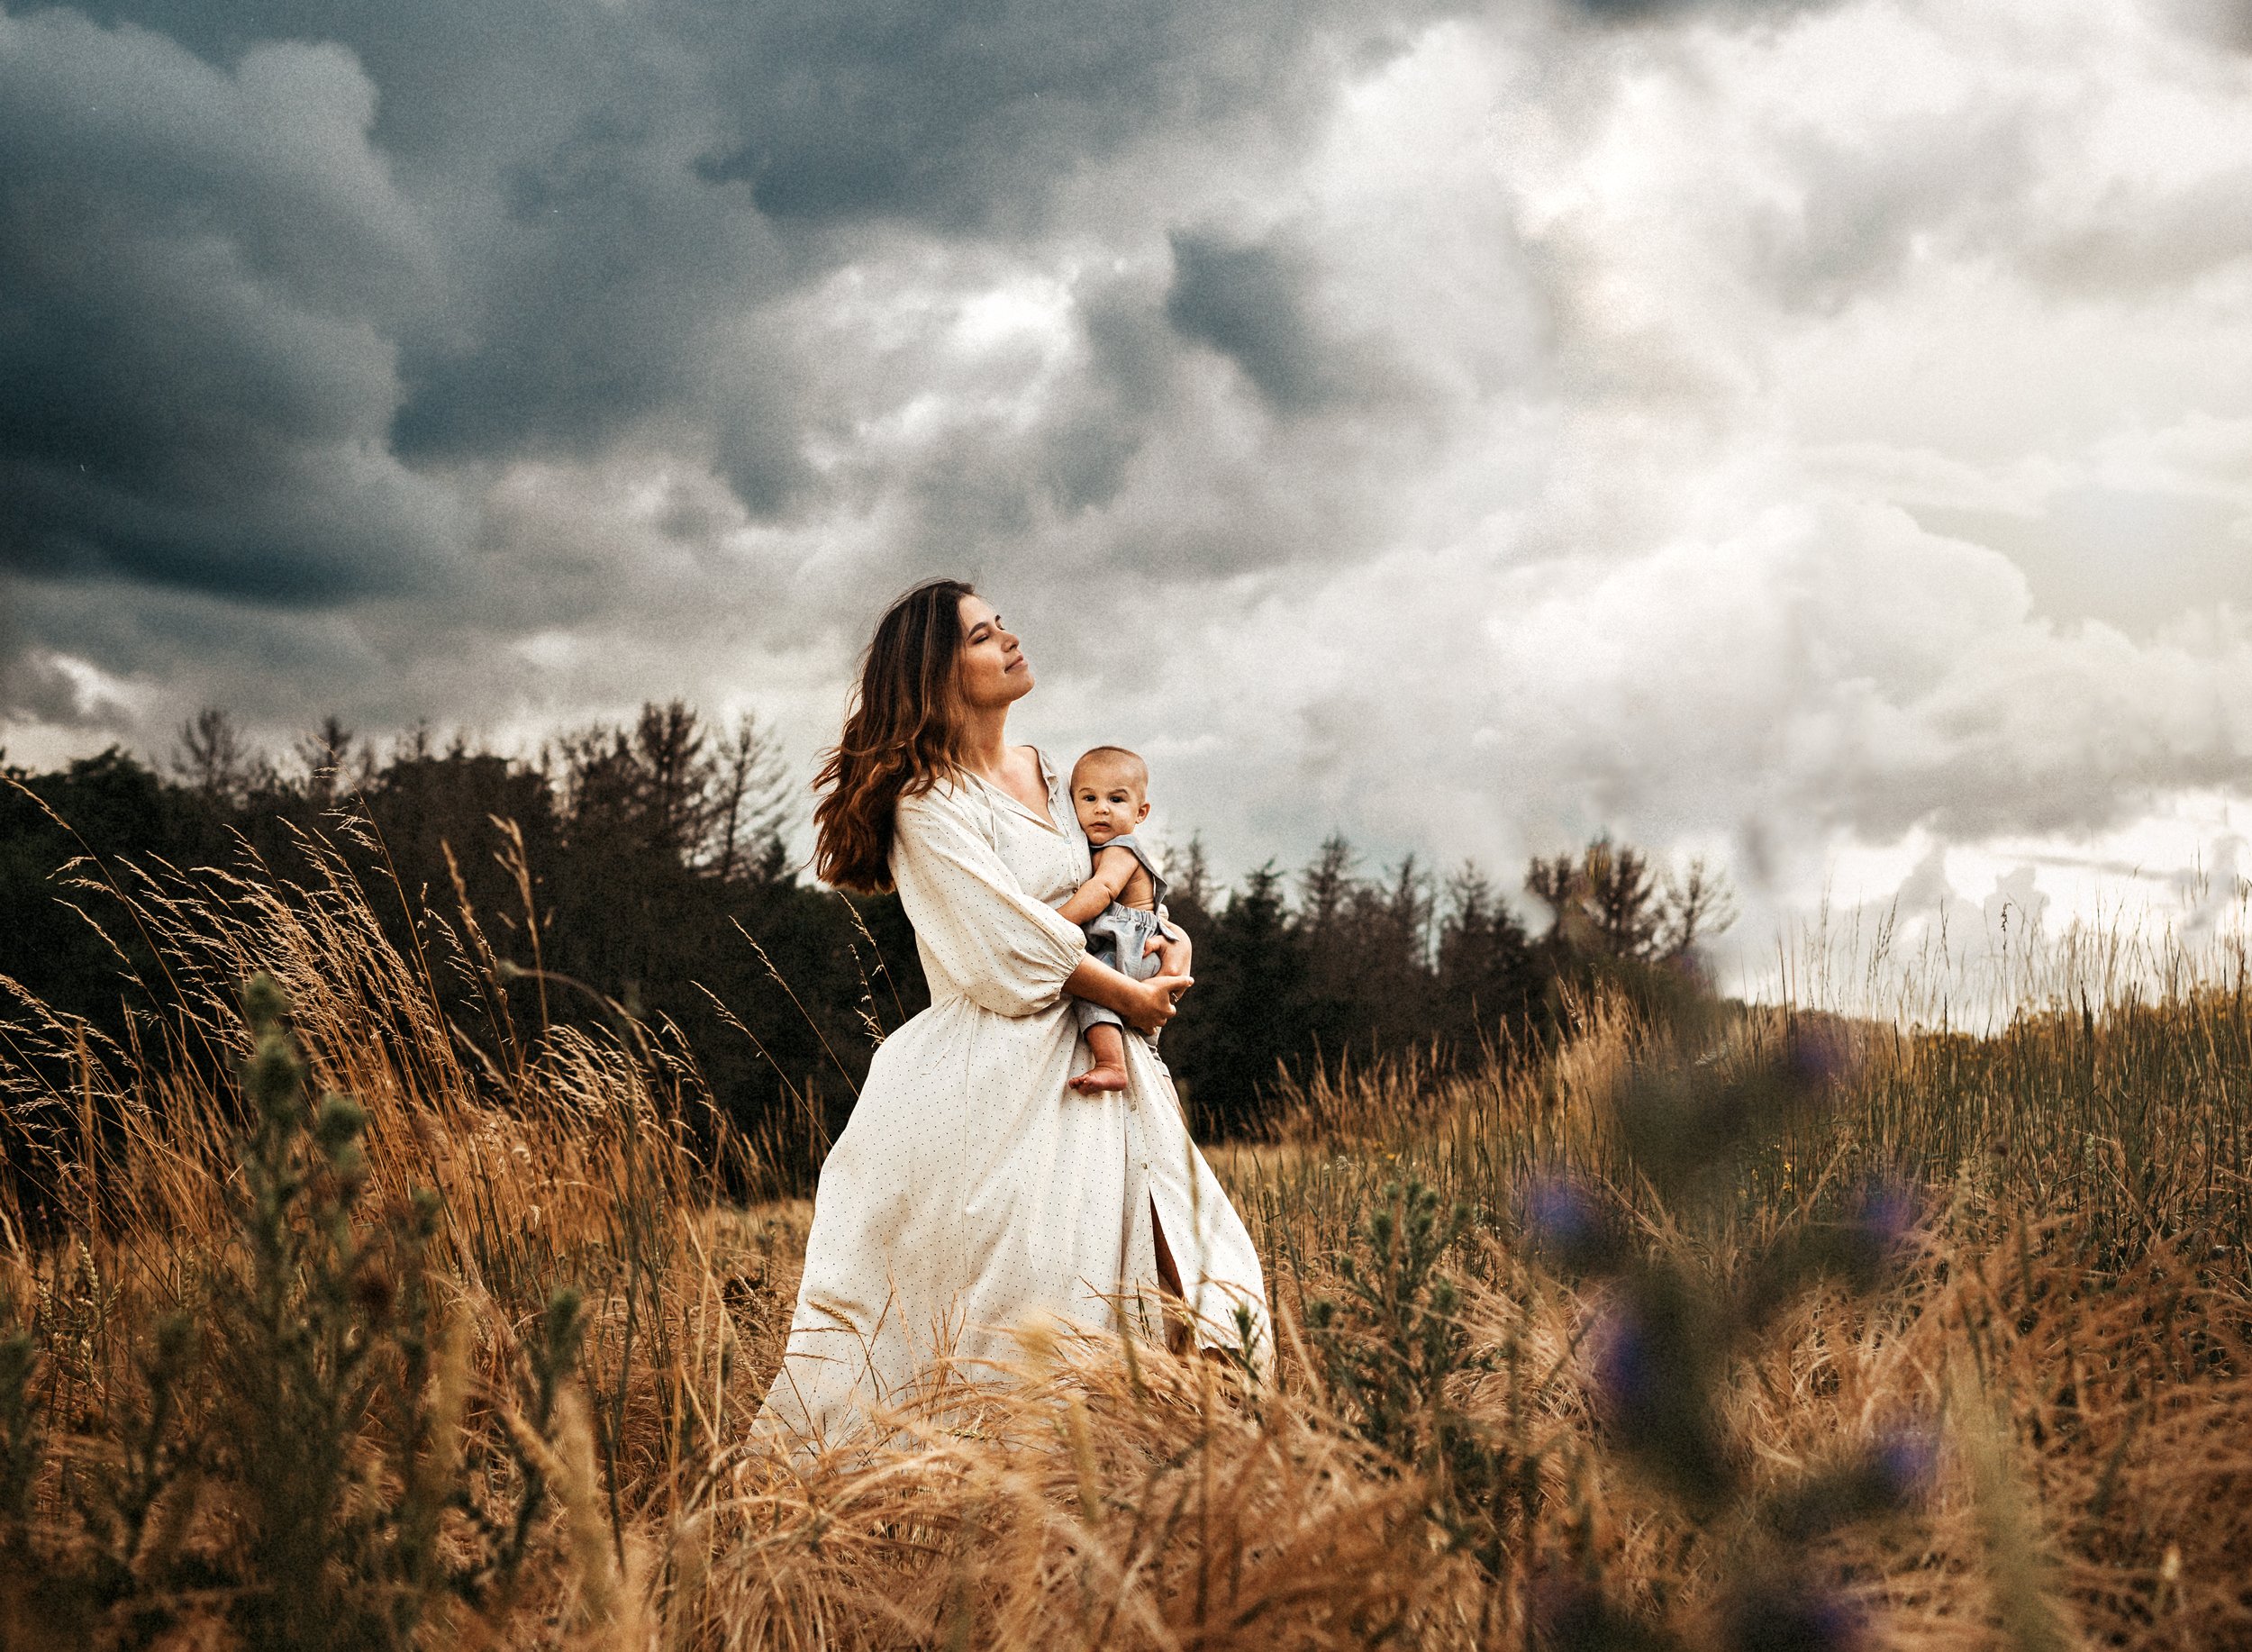 young-mother-and-baby-son-embracing-the-wind-in-a-dry-grass-field-motherhood-photography-in-ramstein-germany-by-family-photographer-sarah-havens-i.jpg